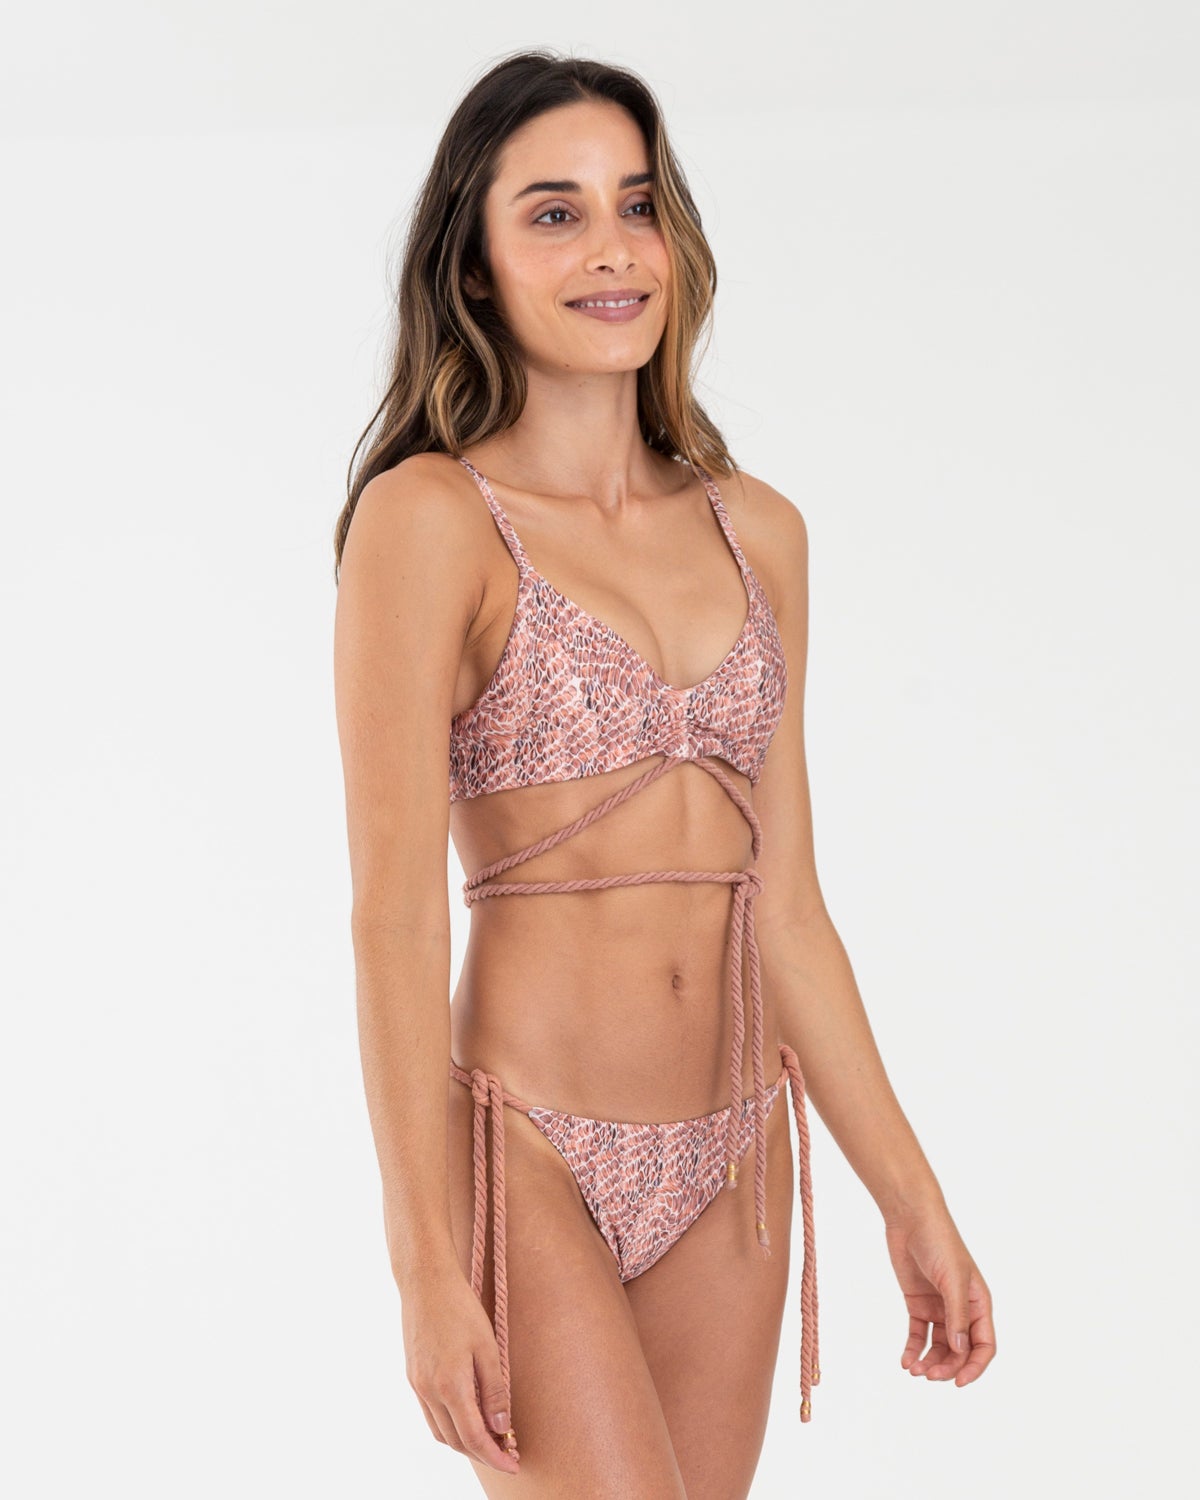 Wrap sporty rose gold colored snake print scoop neck bikini top and matching bikini bottoms with tie side rope details.